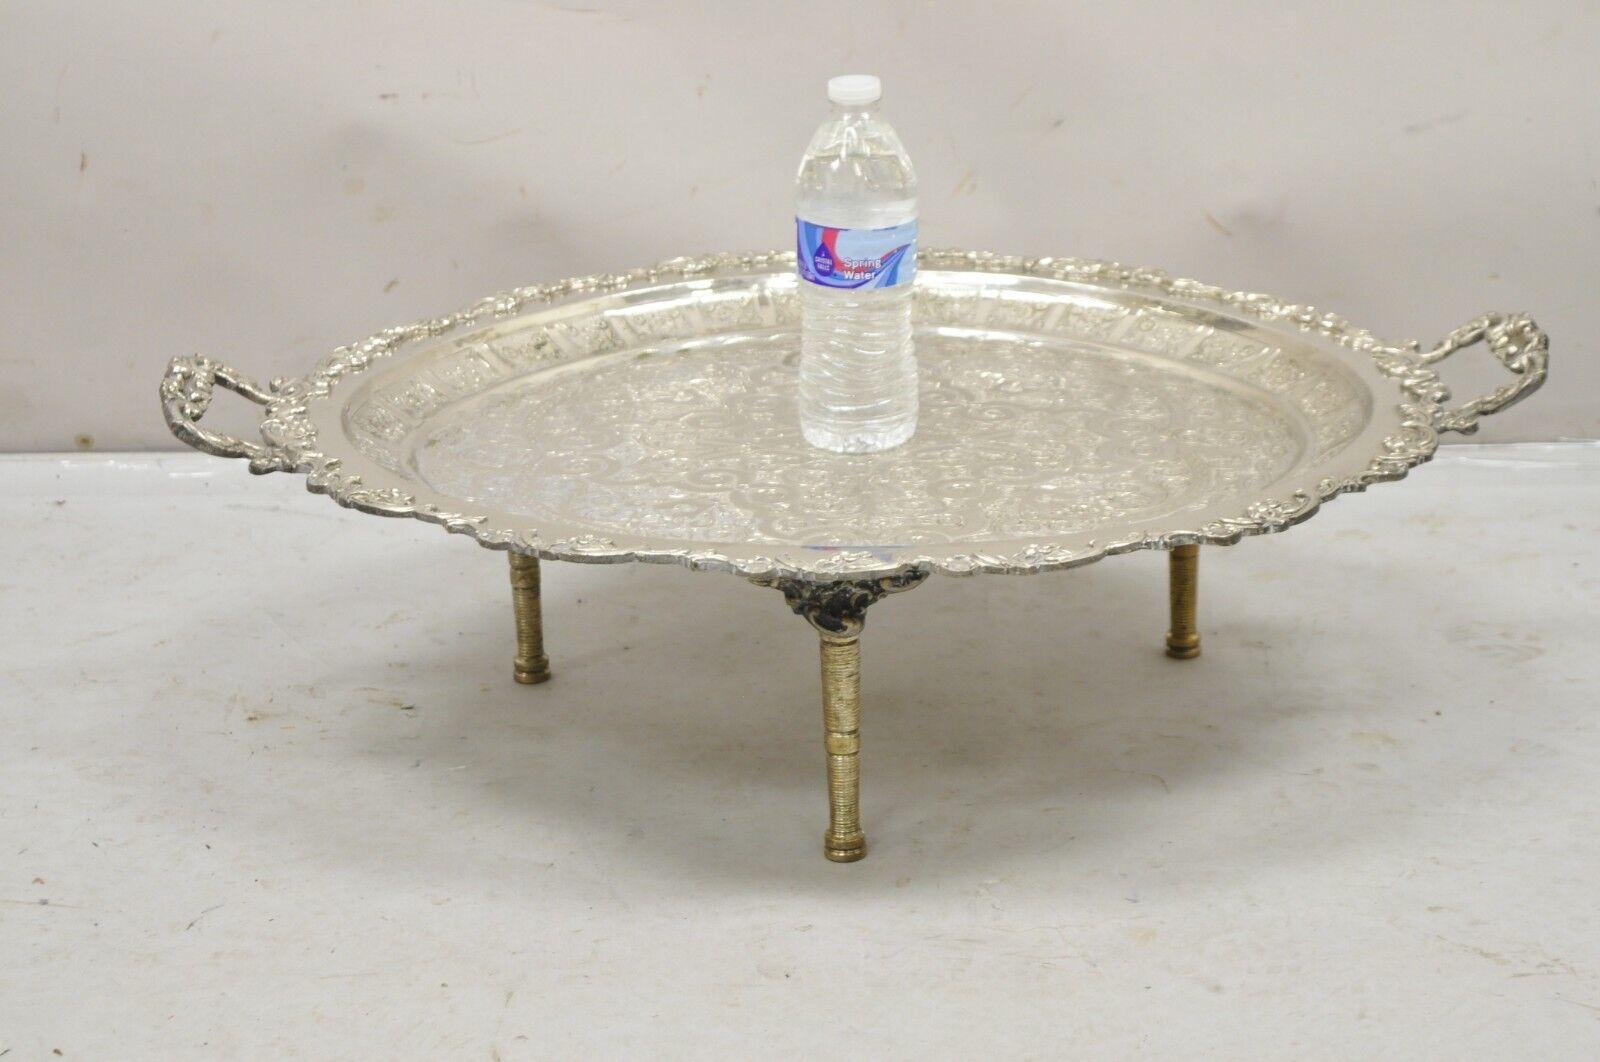 Large Victorian Style Oval Silver Plated Serving Platter Tray on Raised Feet. Item features removable tapered legs, ornate designed tray, shell form handles, large impressive size, original hallmark, believed to be Indian Circa Mid to 20th Century.